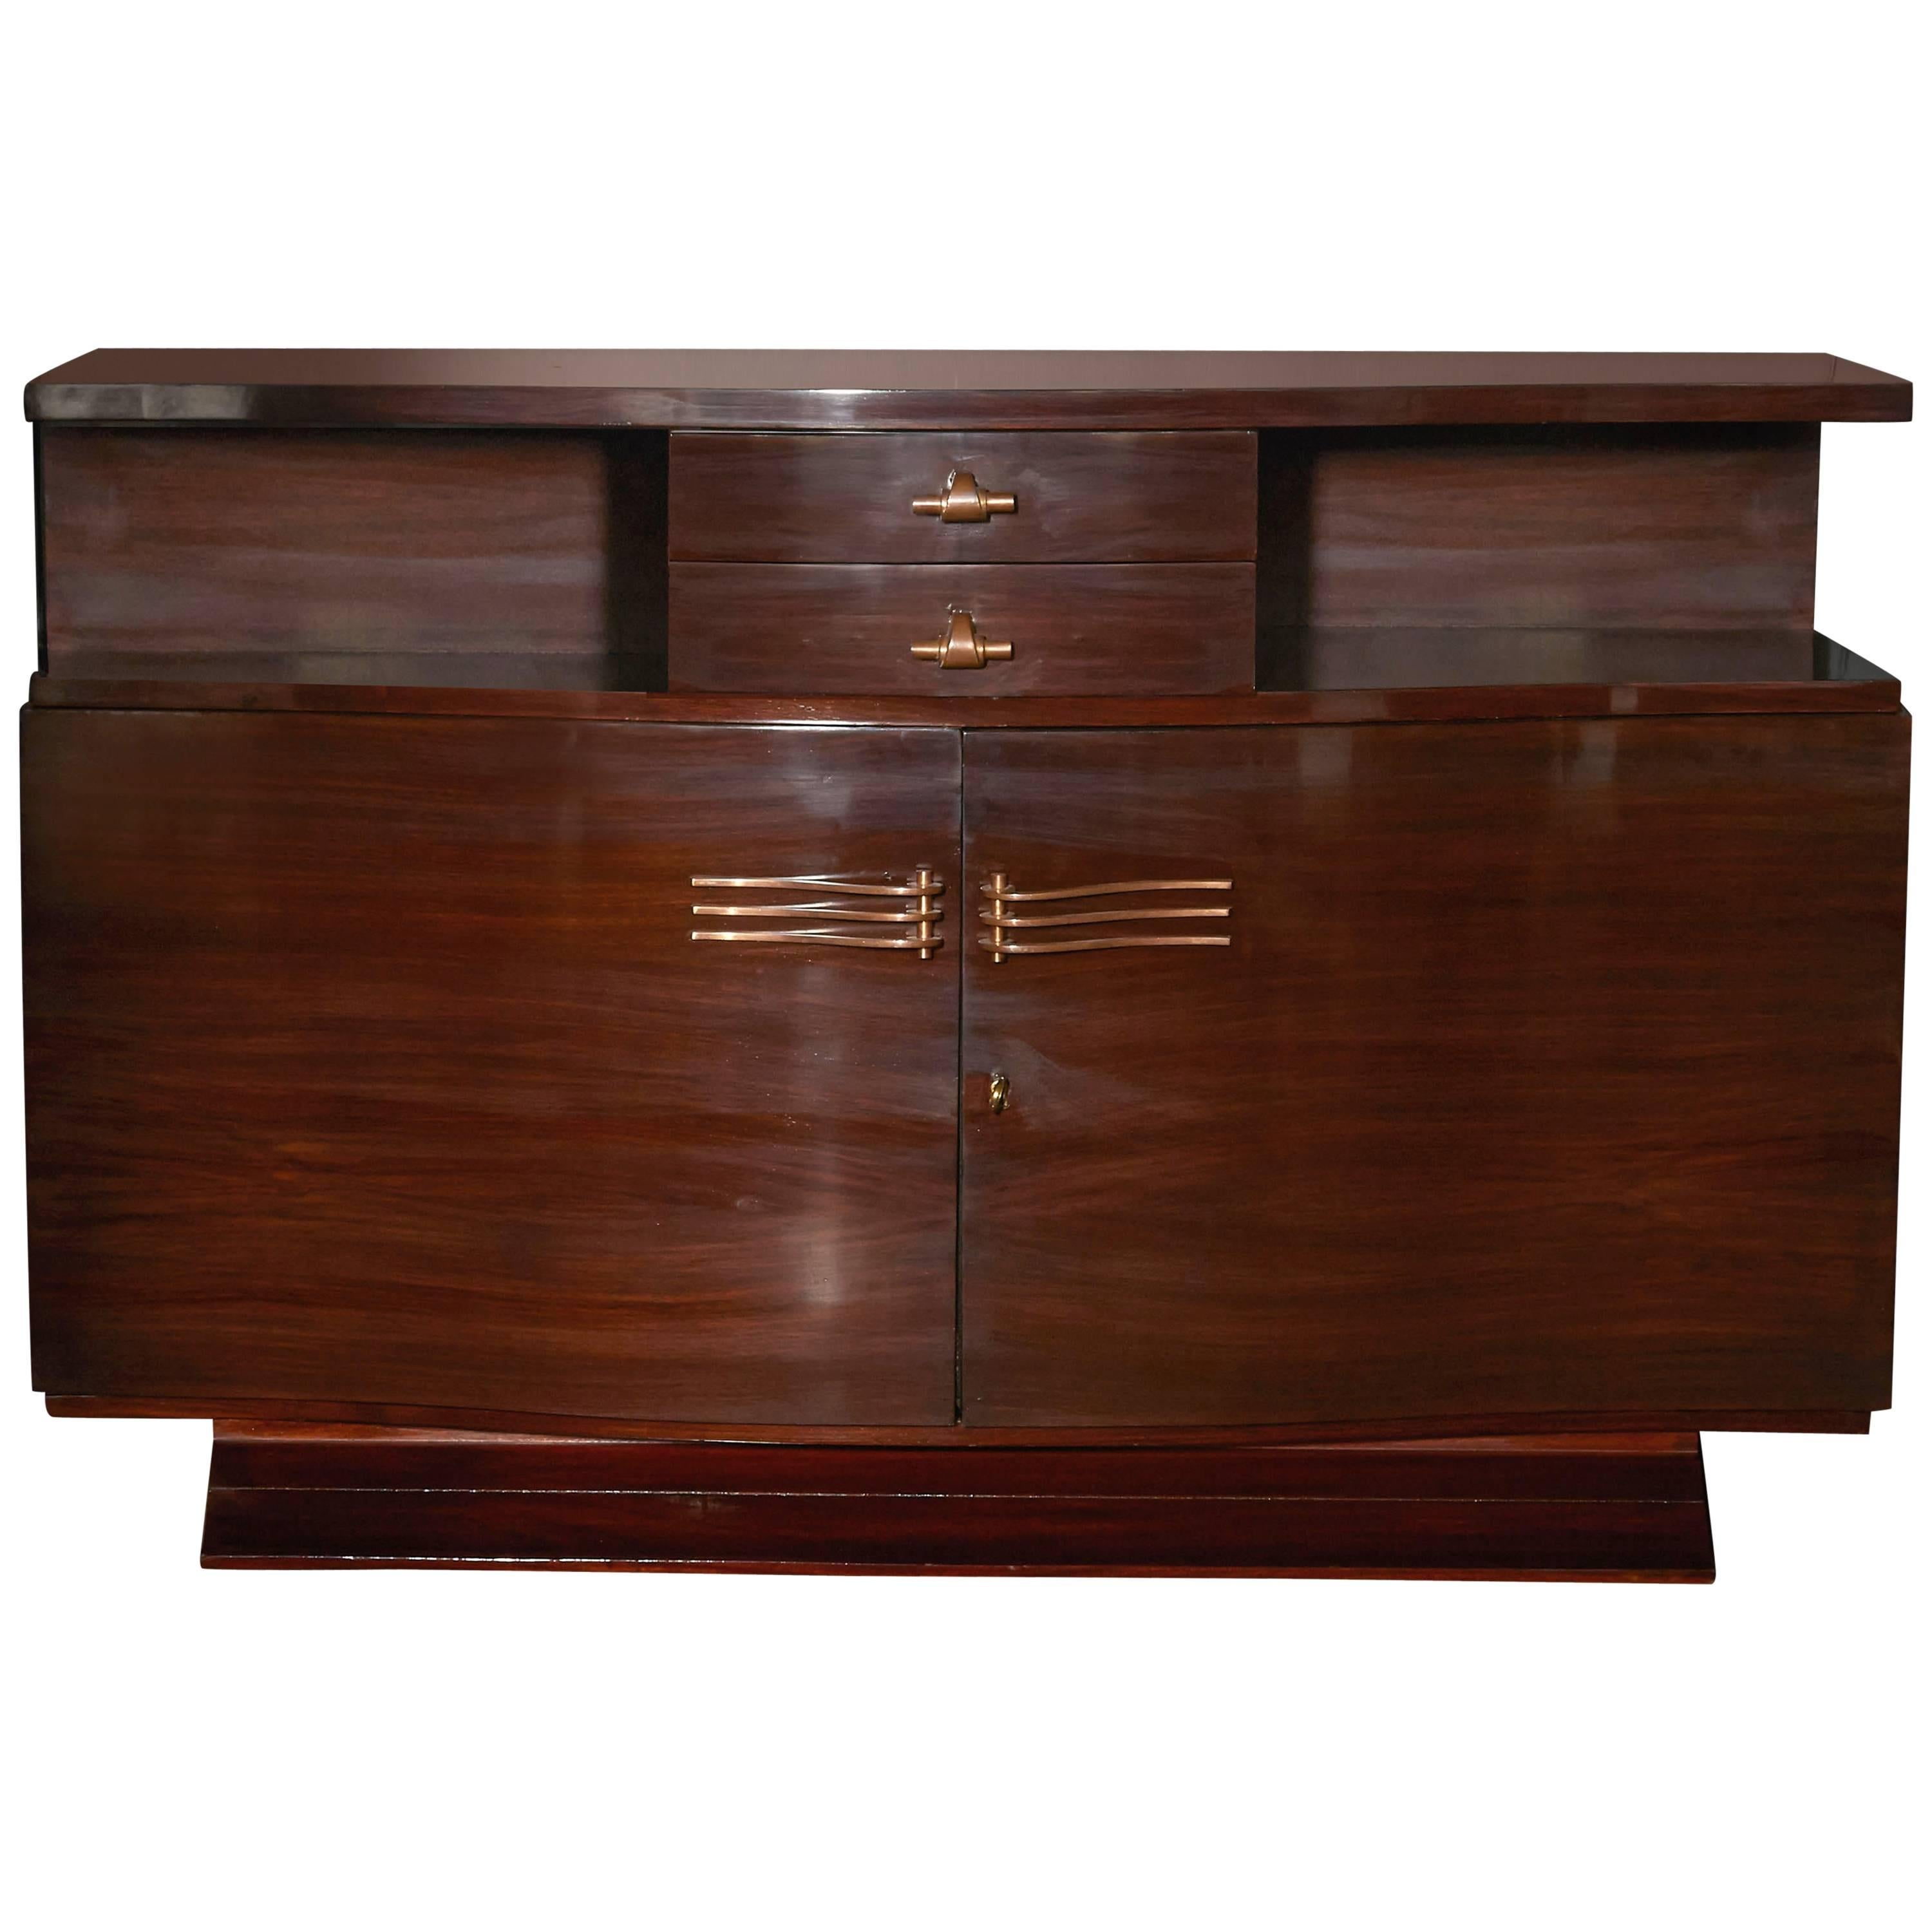 Art Deco Rosewood Sideboard with Bow Fronted Design